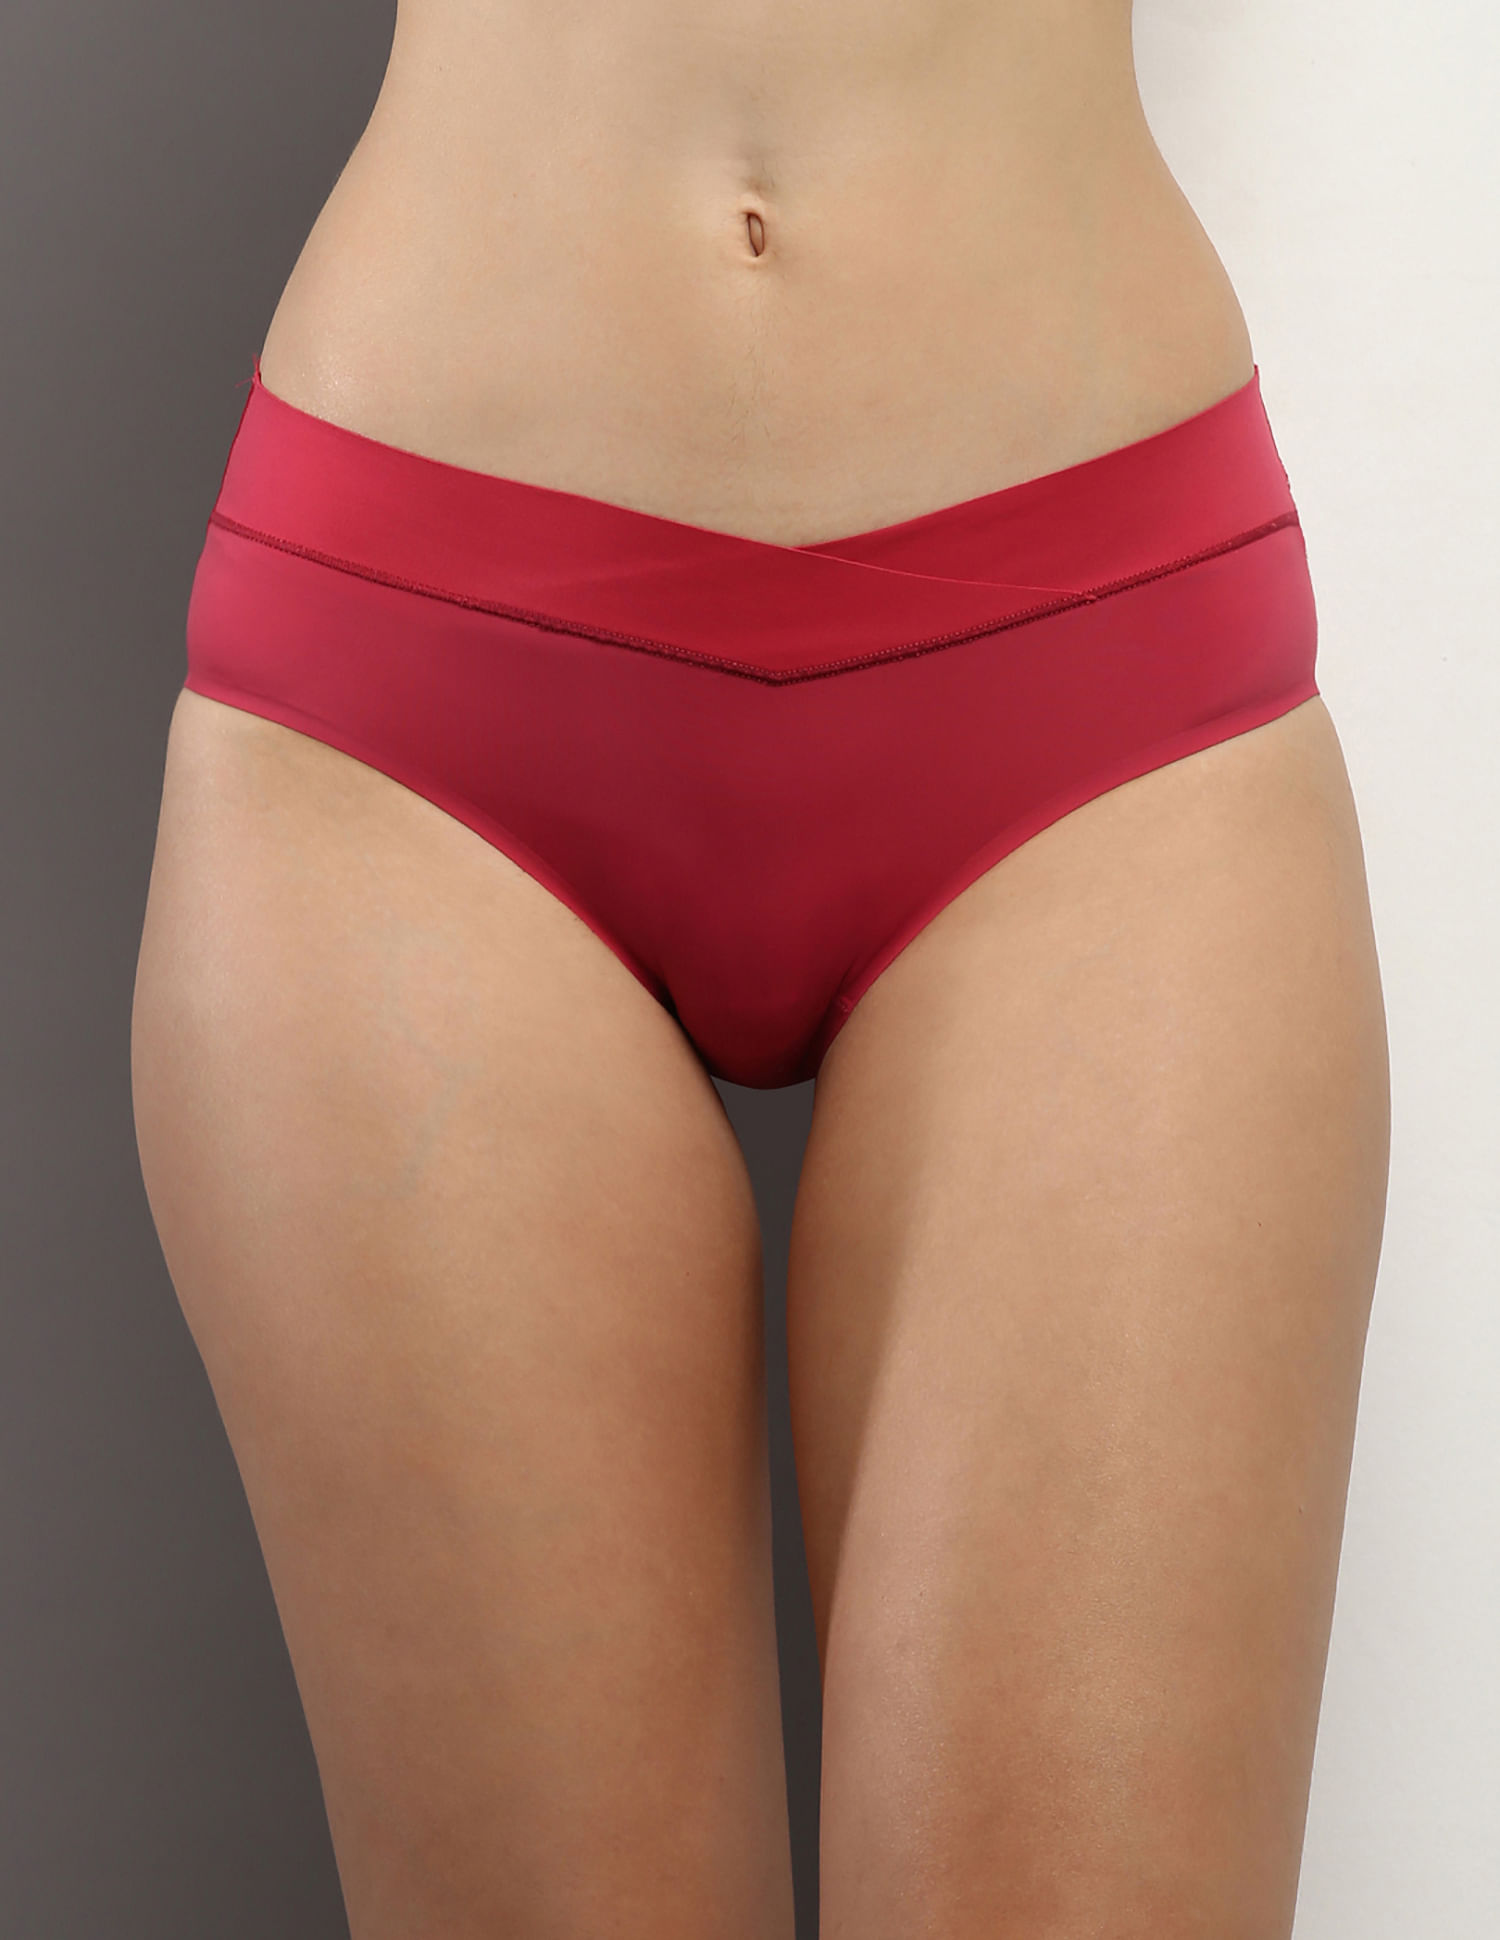 KLYDOO Women Cotton Hipster Solid Plus Size Panty Small to 7XL Pack of 2 Red